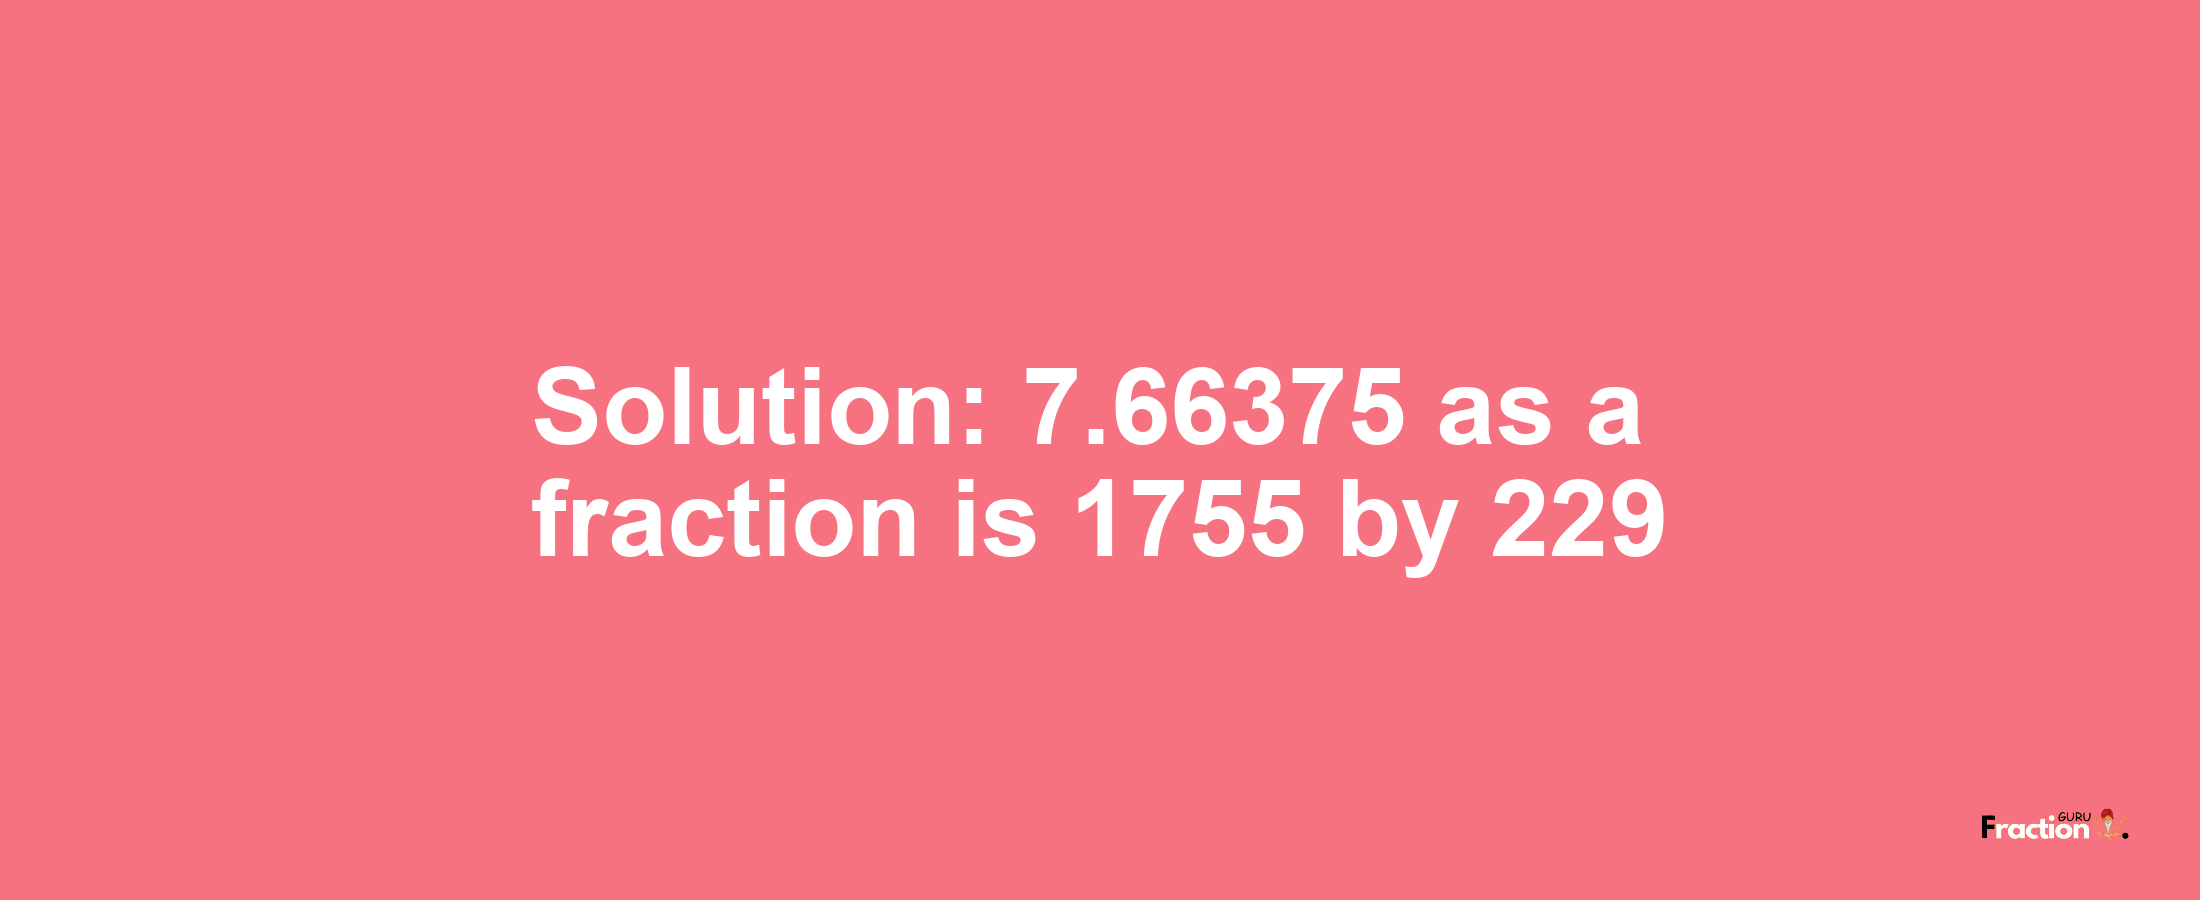 Solution:7.66375 as a fraction is 1755/229